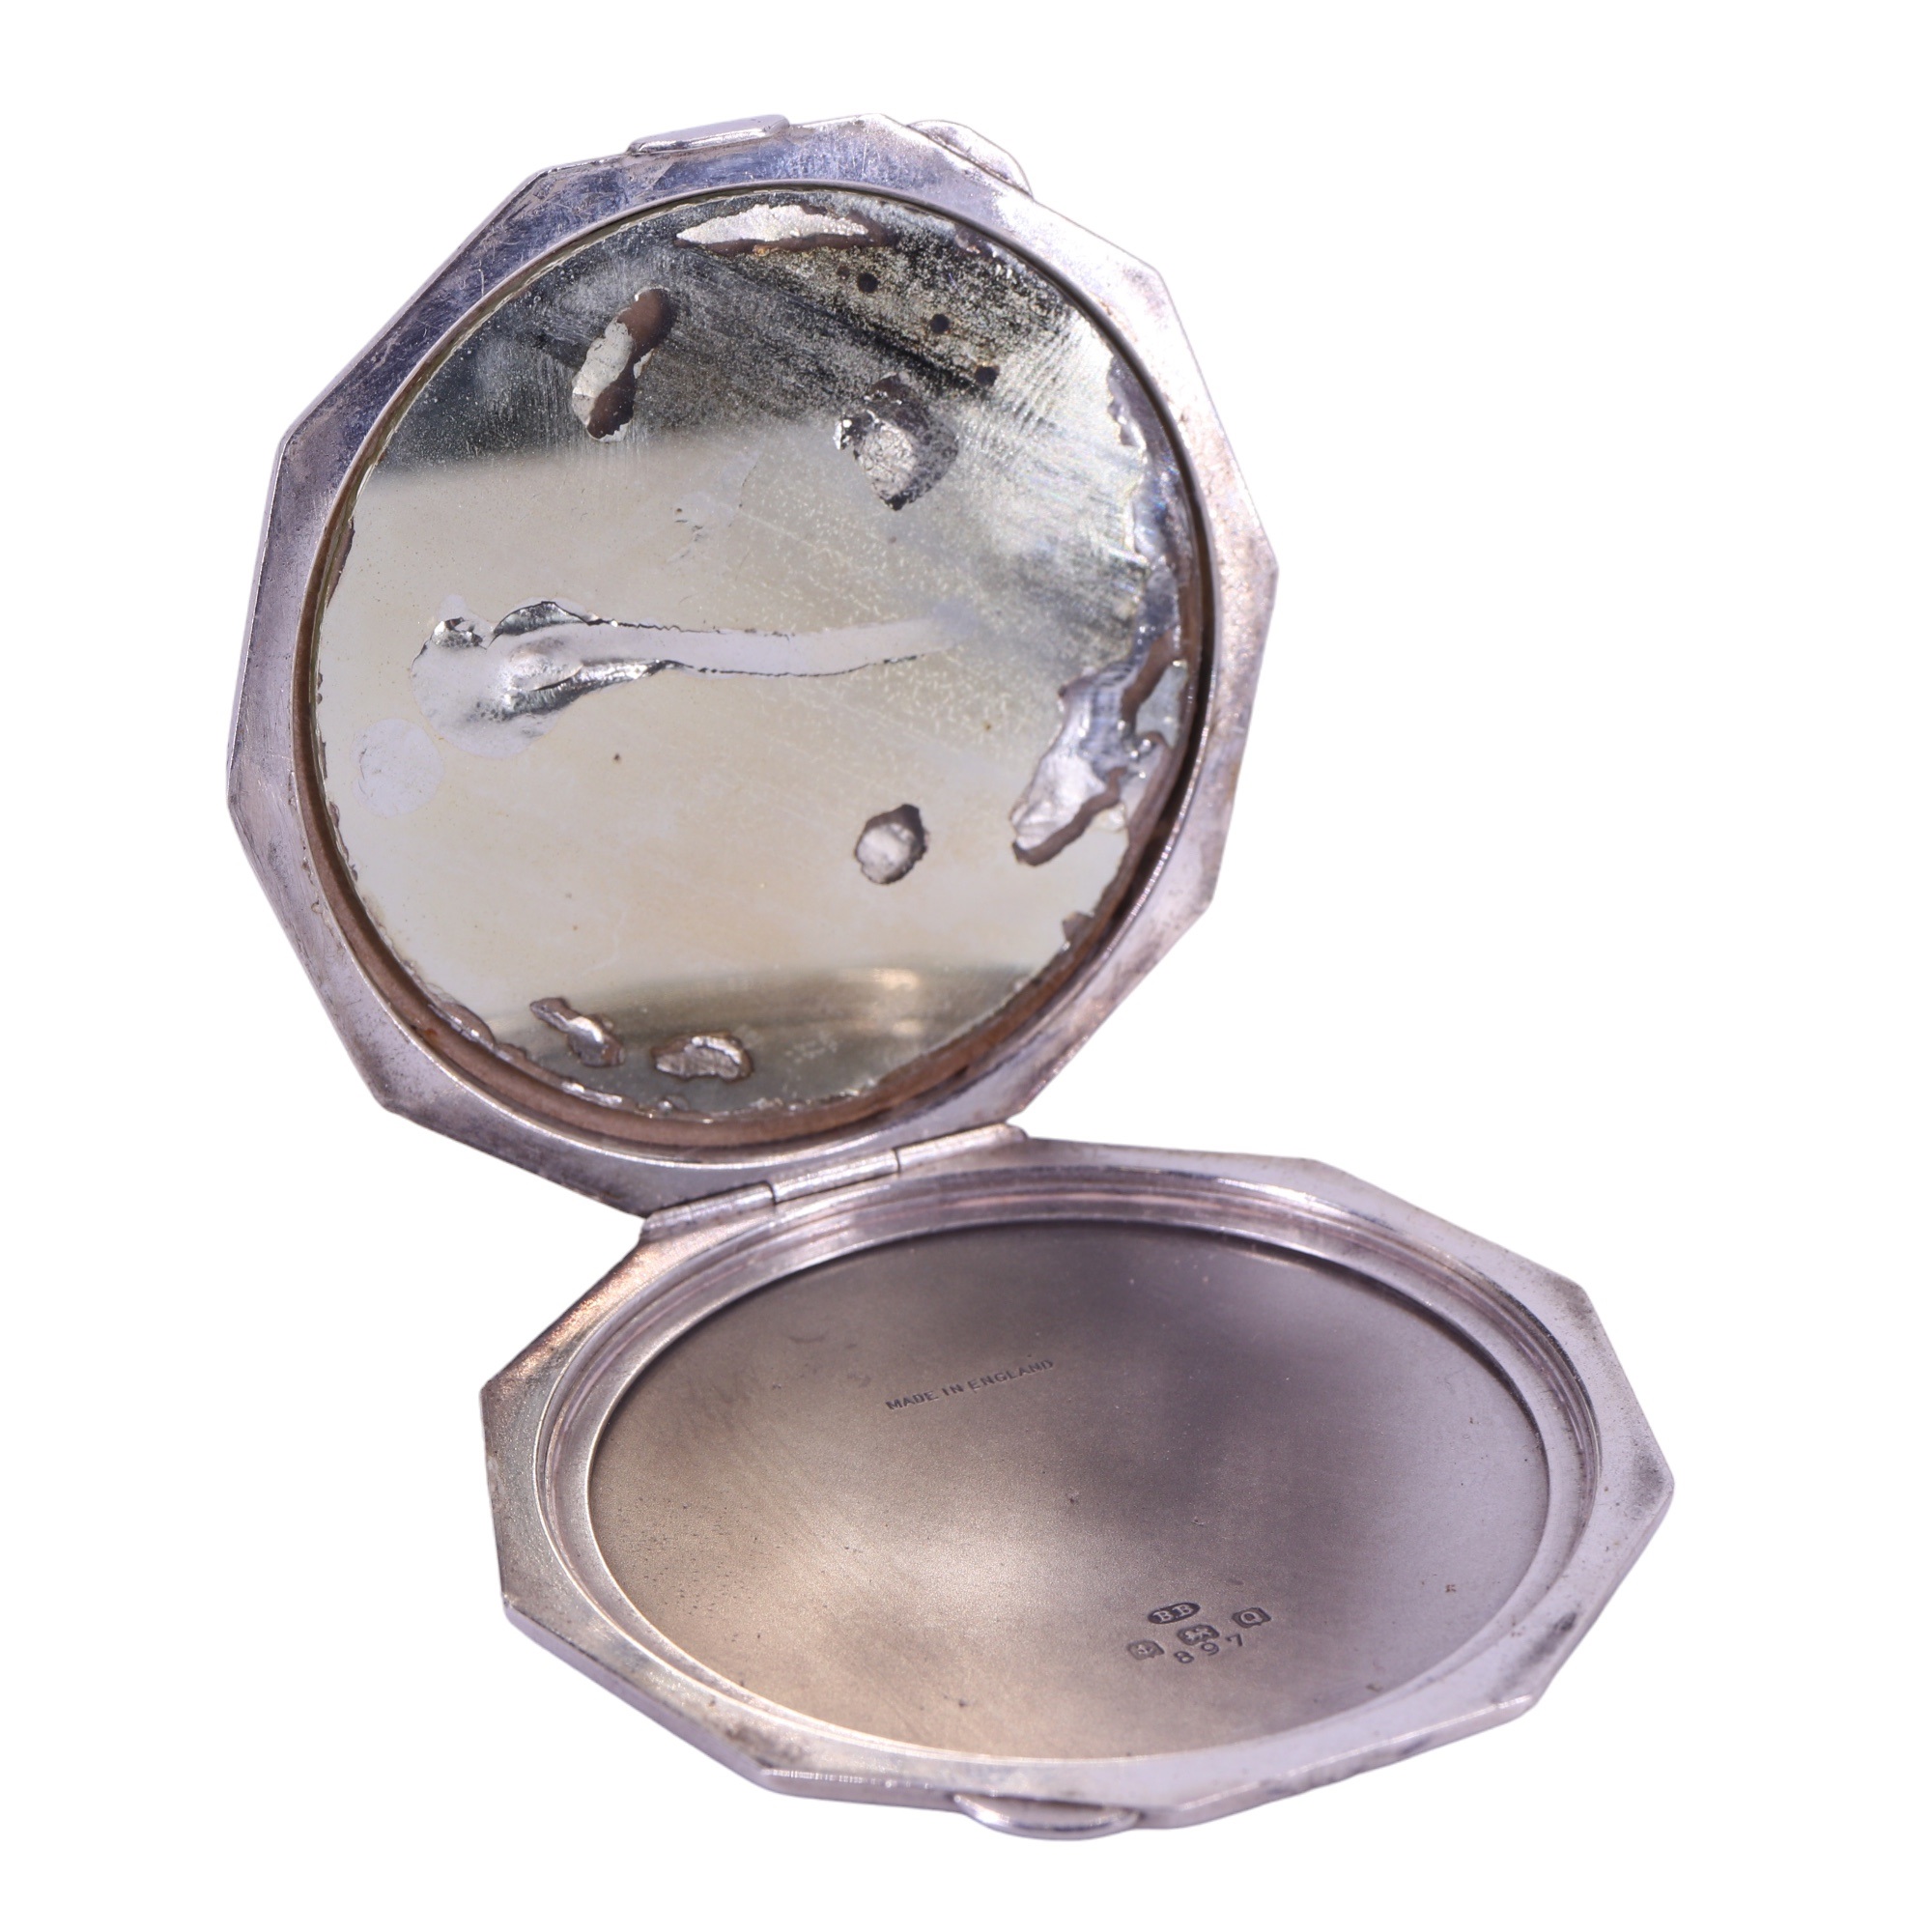 A 1940s RAF enamelled silver sweetheart or WRAF powder compact, 6.5 cm - Image 2 of 3